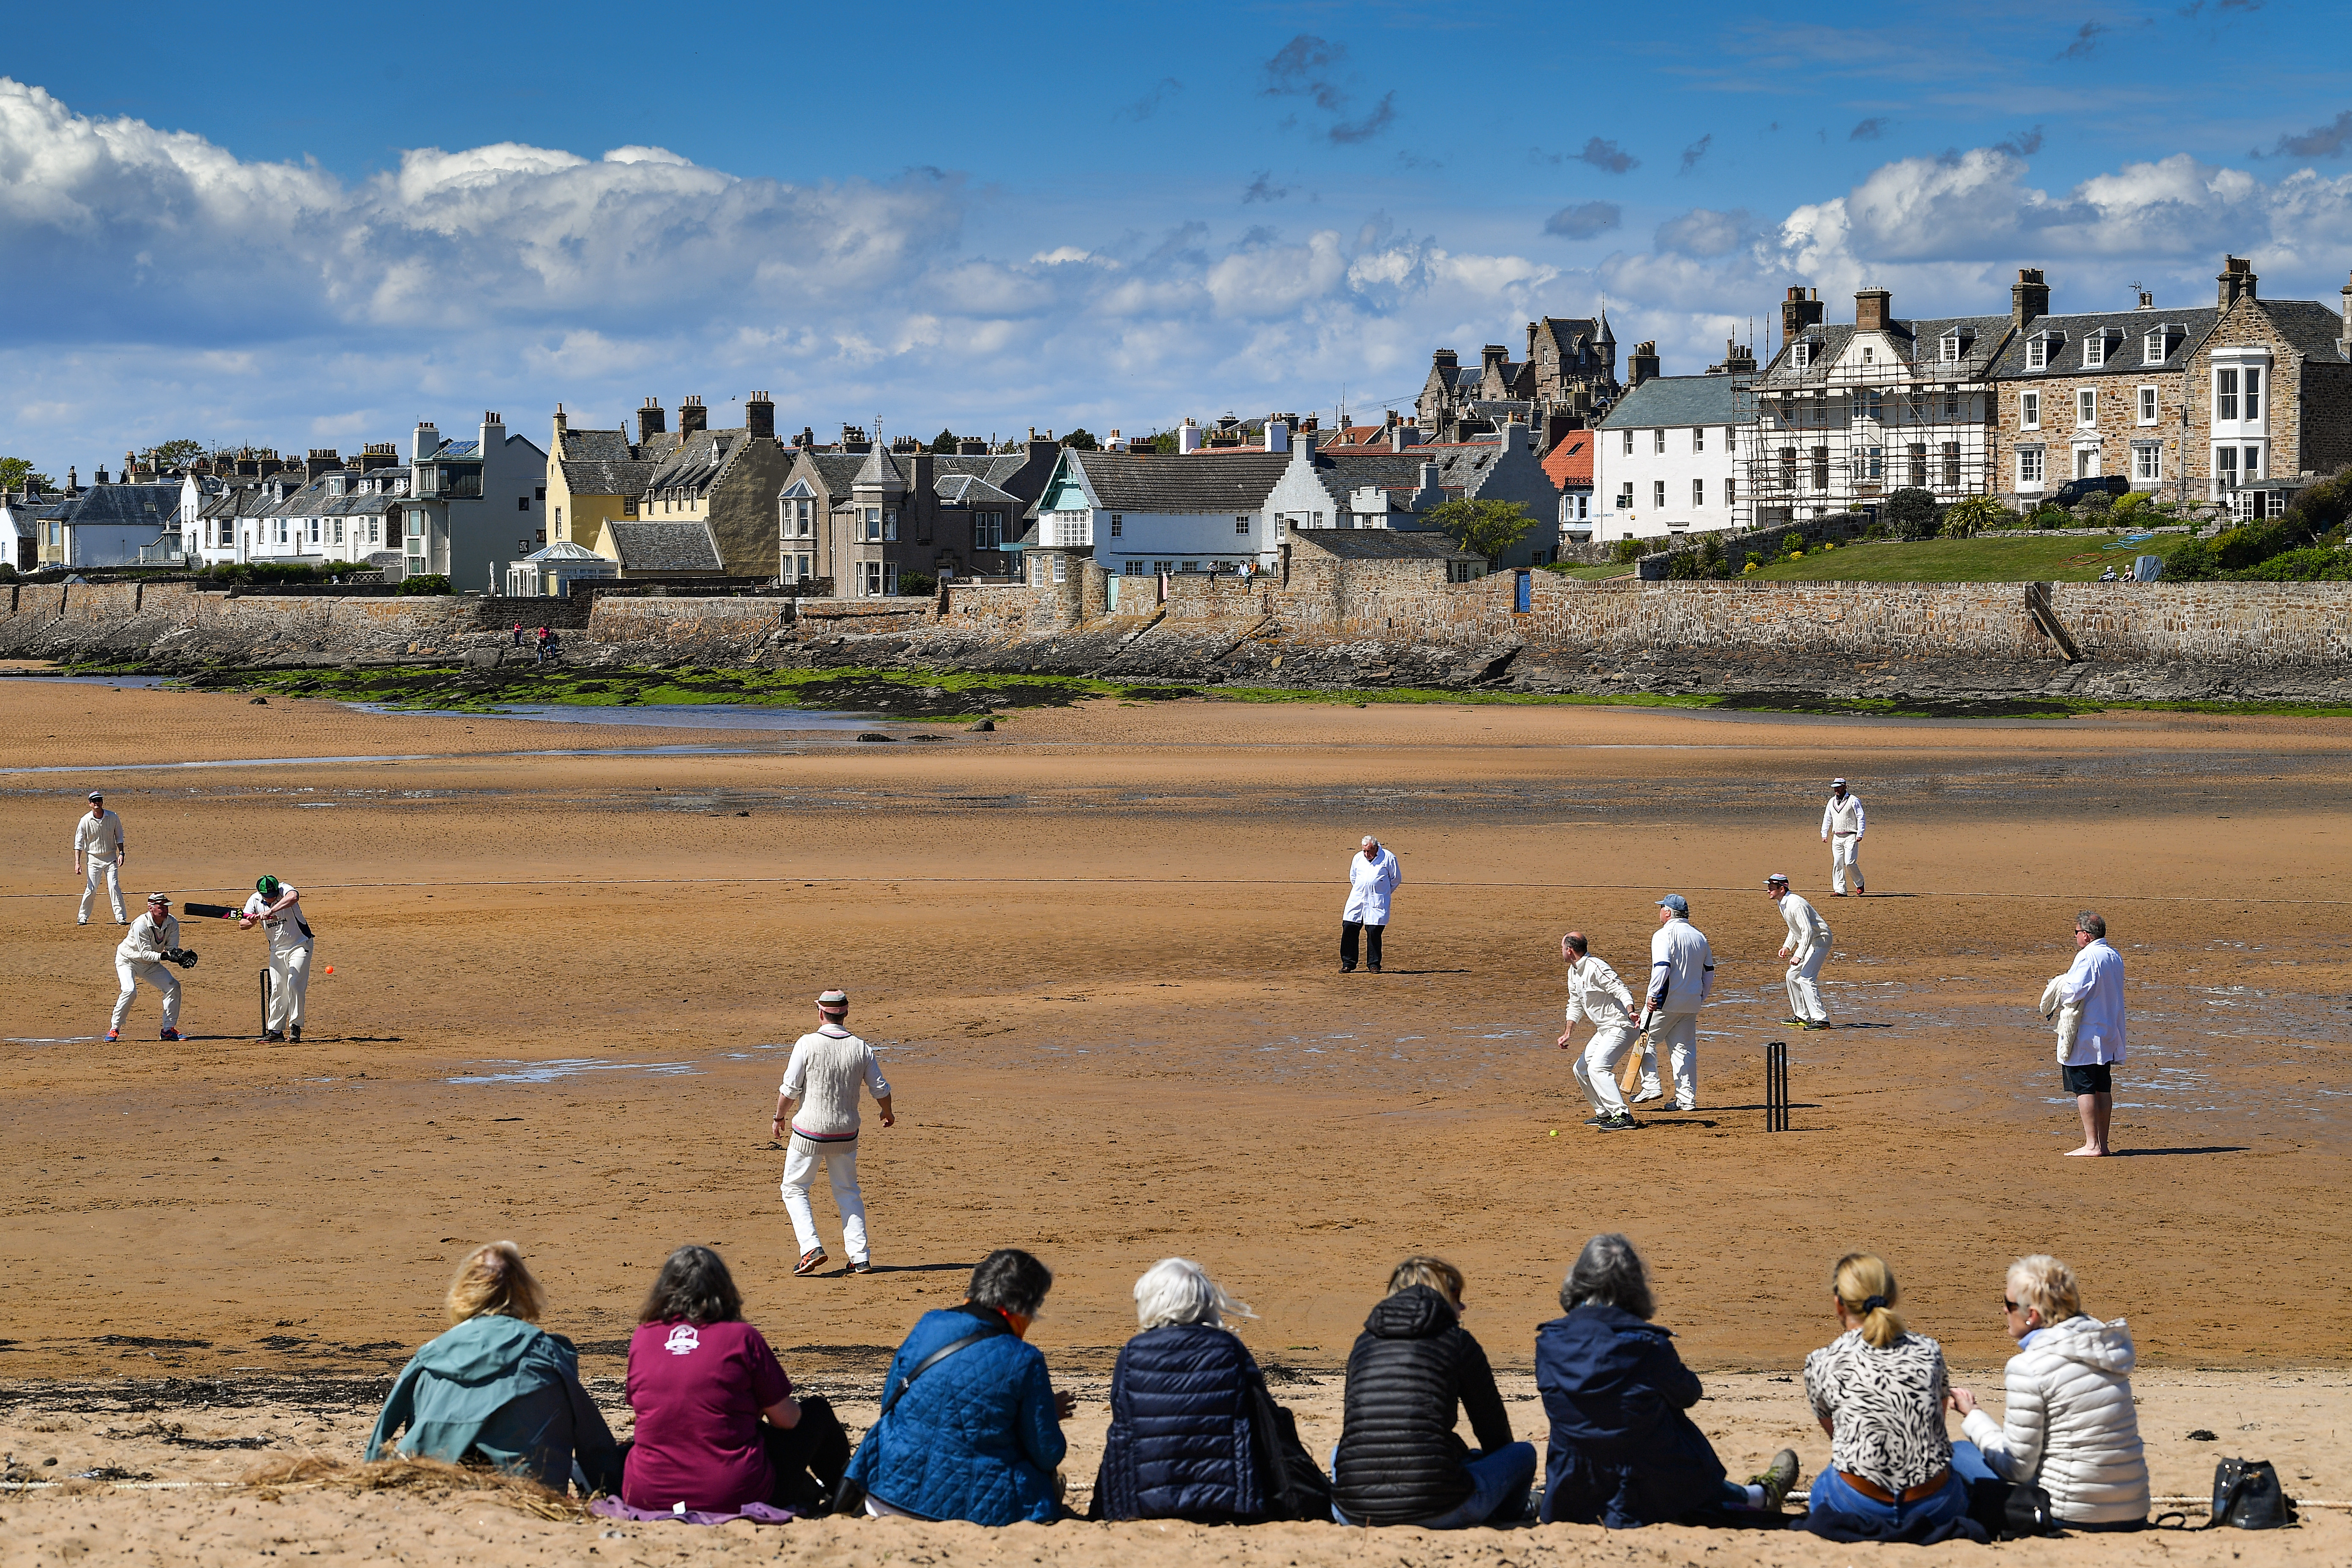 The Ship Inn cricketers from Elie, in Fife, the only team in the UK to play their matches on a beach, open the season against the Borderers